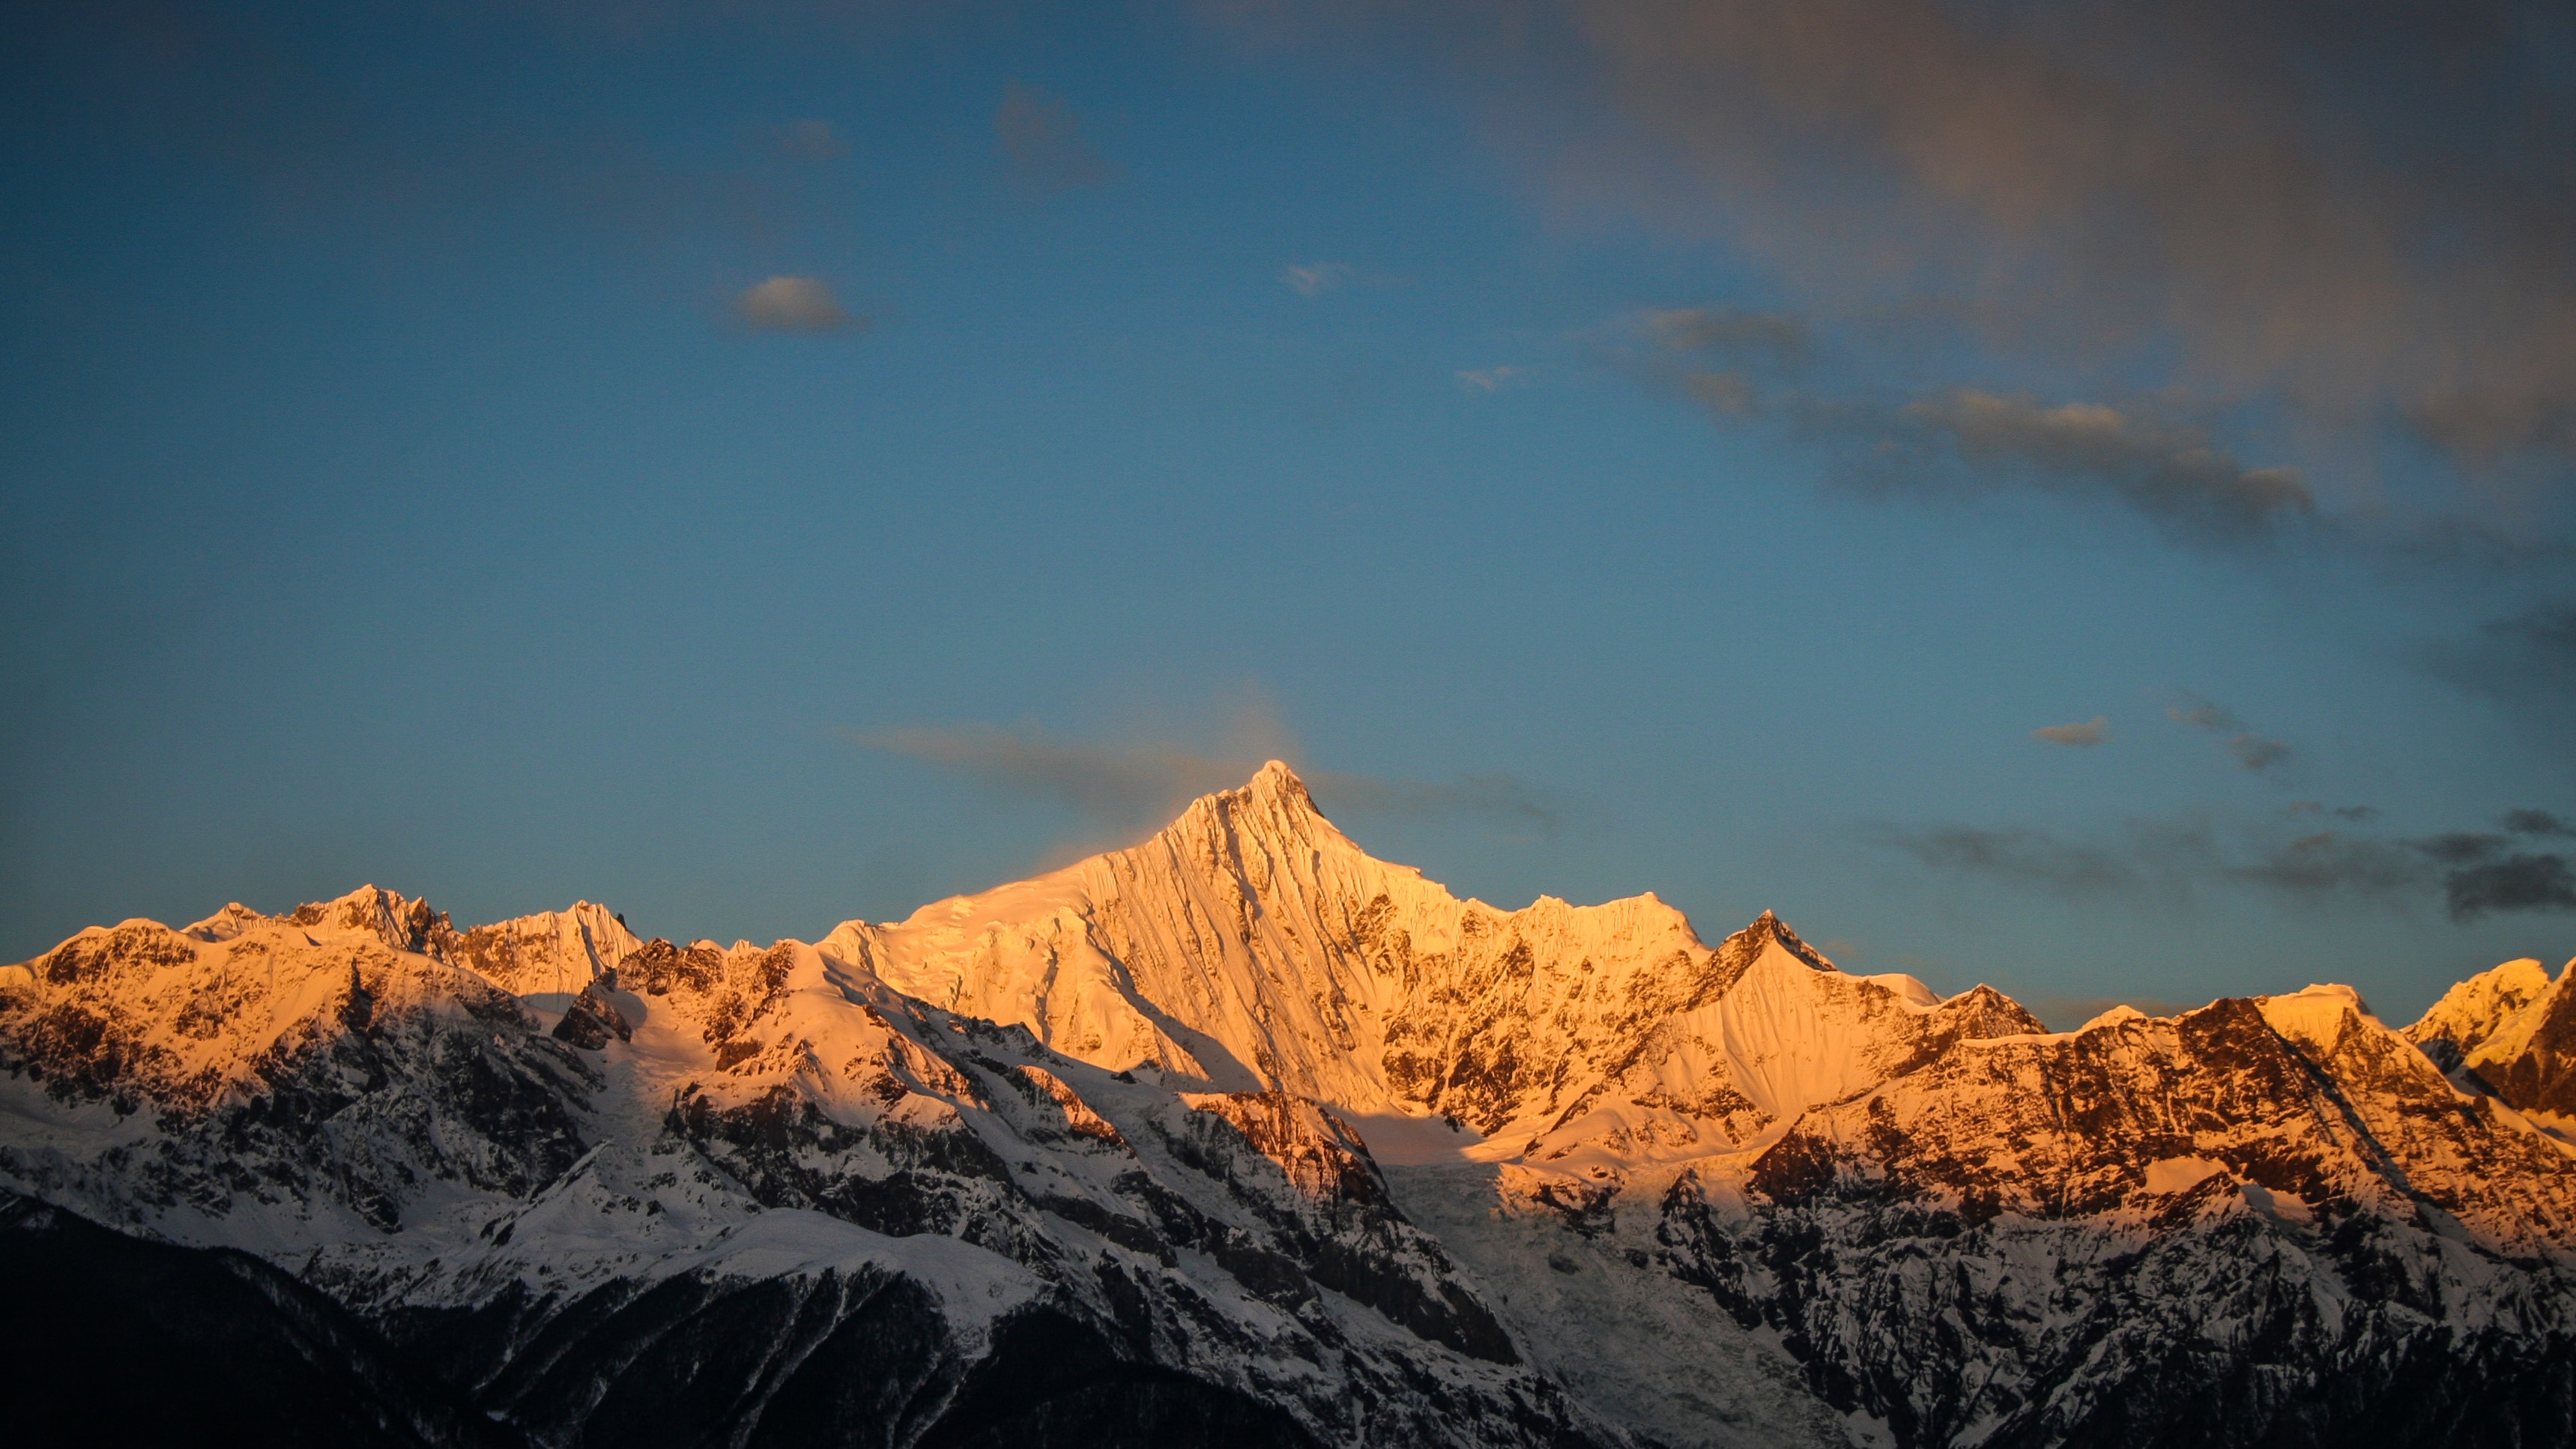 Snowy mountain during golden hour photo